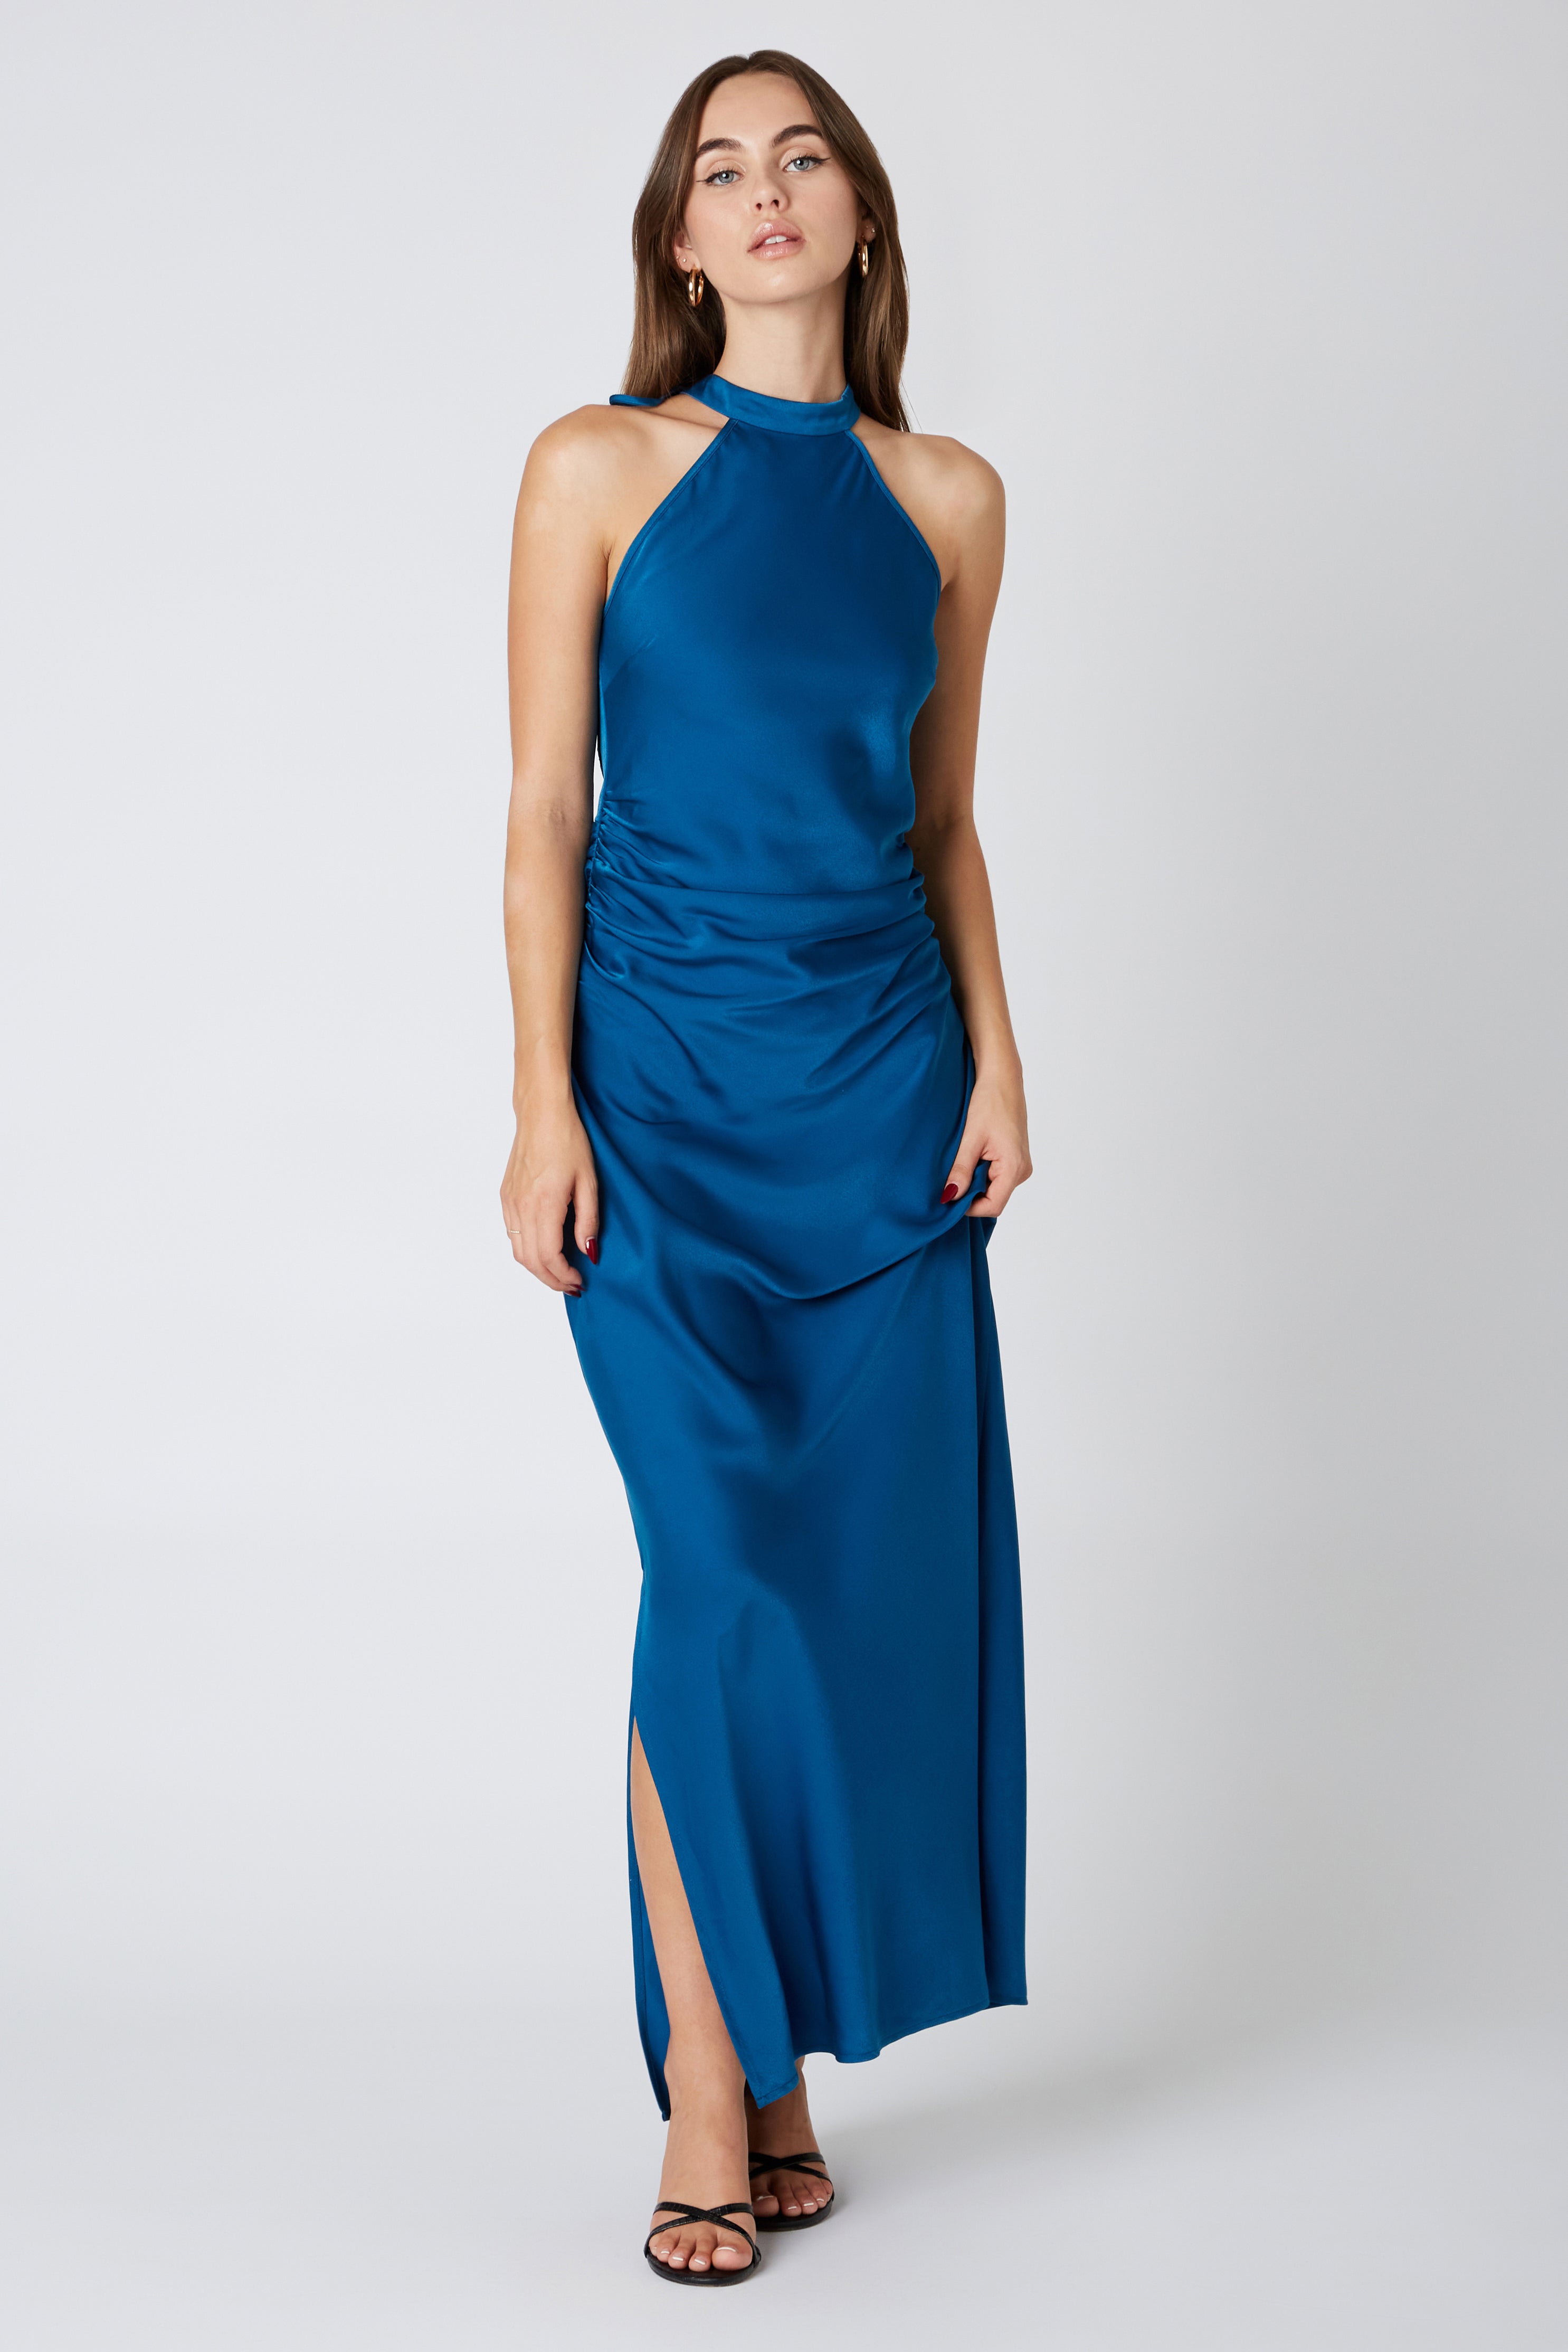 Runway Butterfly Maxi Dress in Teal Blue Front View